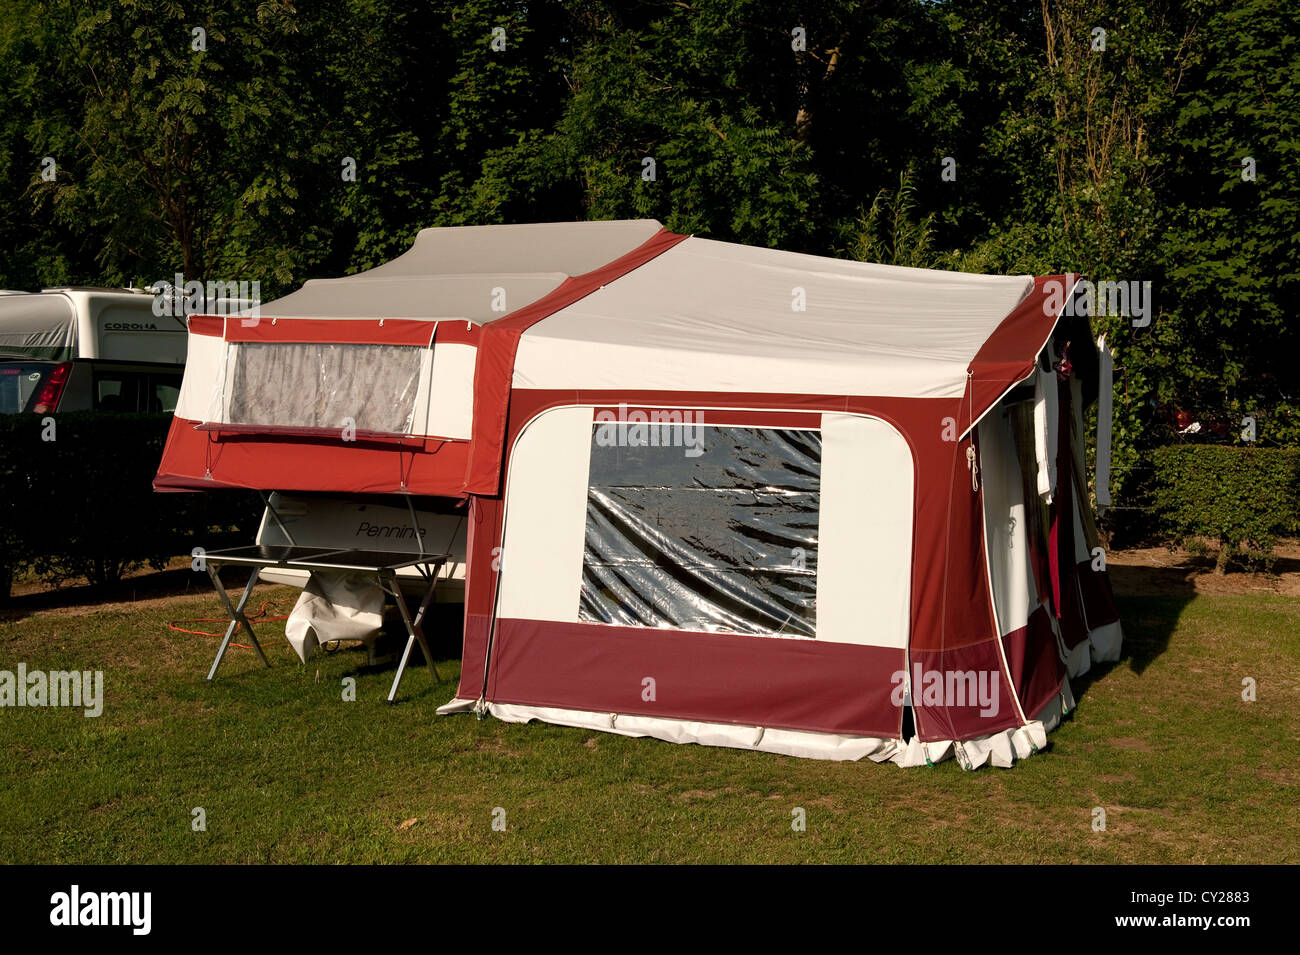 Trailer Tent Camp Site Guines France Europe Stock Photo - Alamy